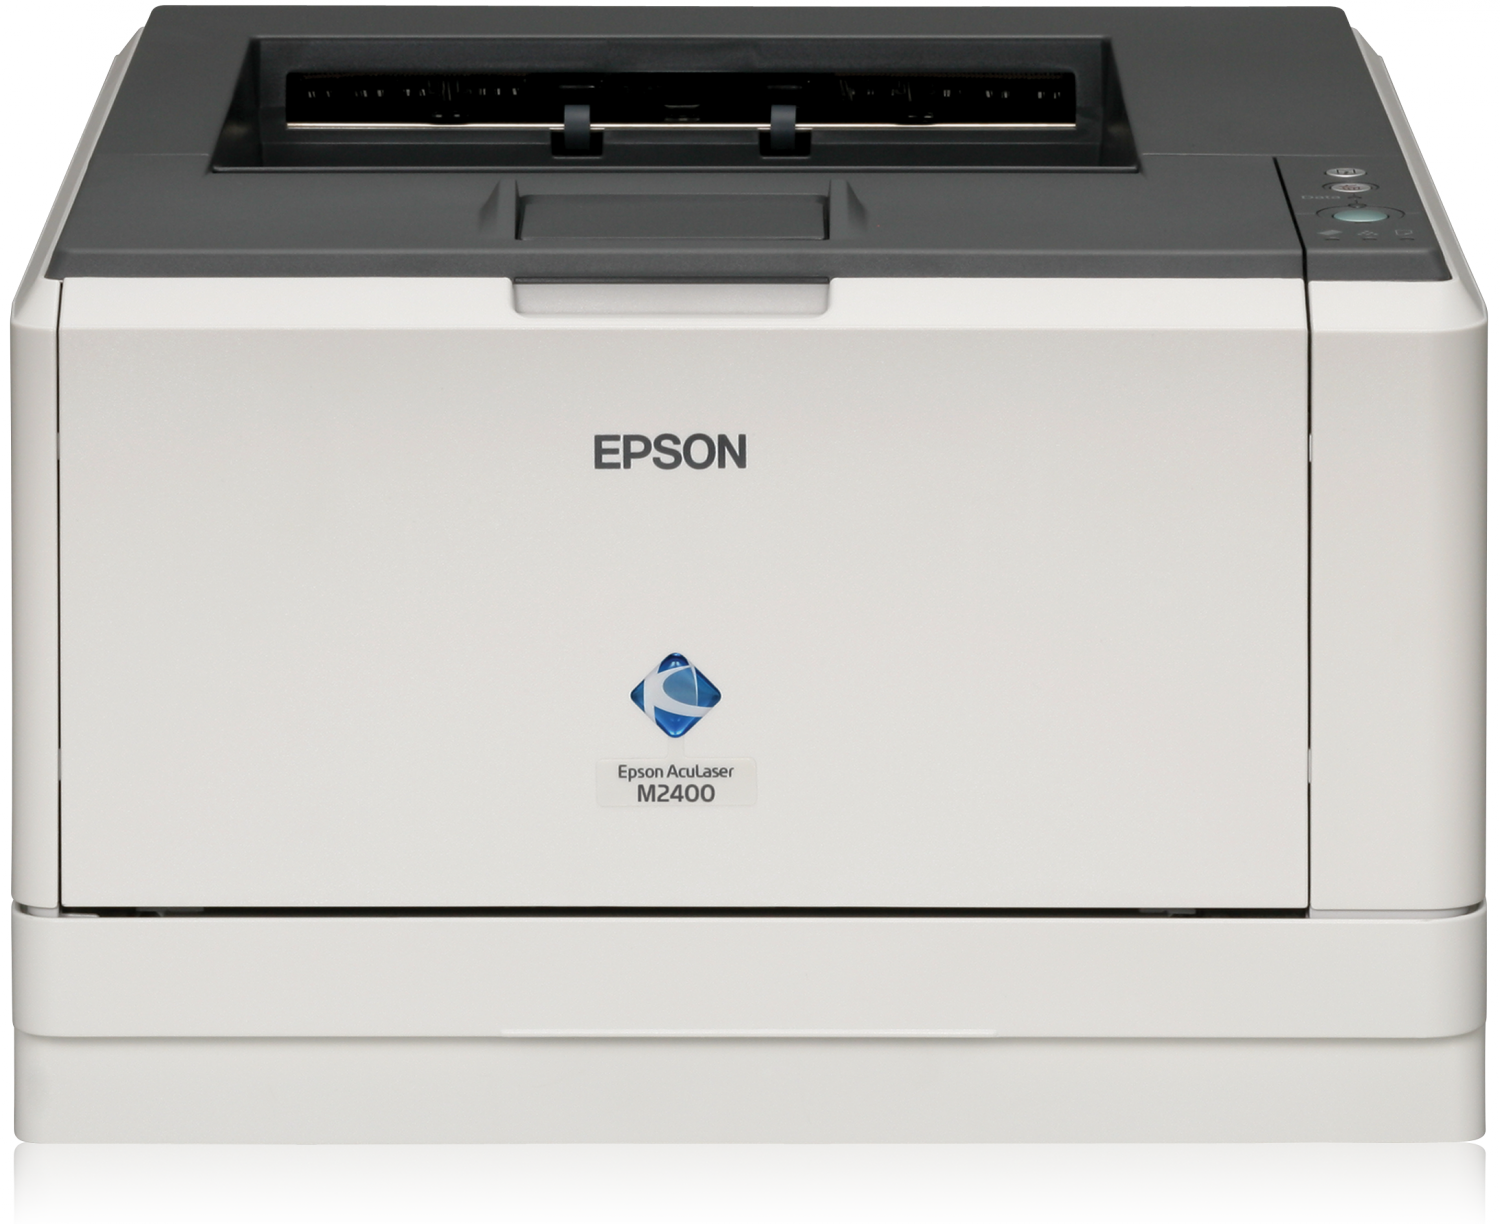 Telecharger epson aculaser m2000 driver